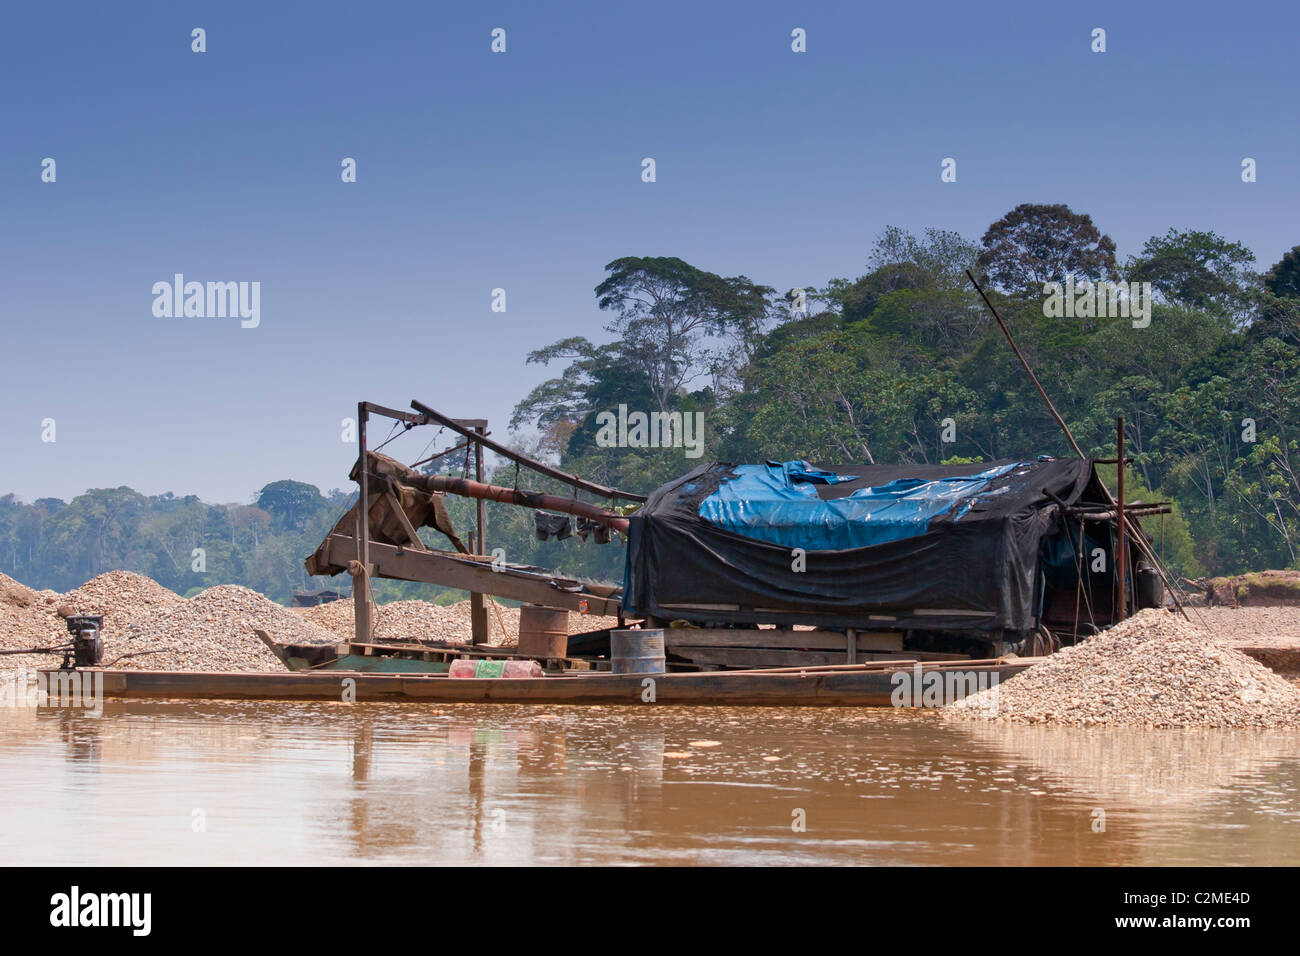 Illegal gold mining on the Tambopata River in the Peruvian Amazon. Boats mine the alluvial sand for gold and release mercury. Stock Photo